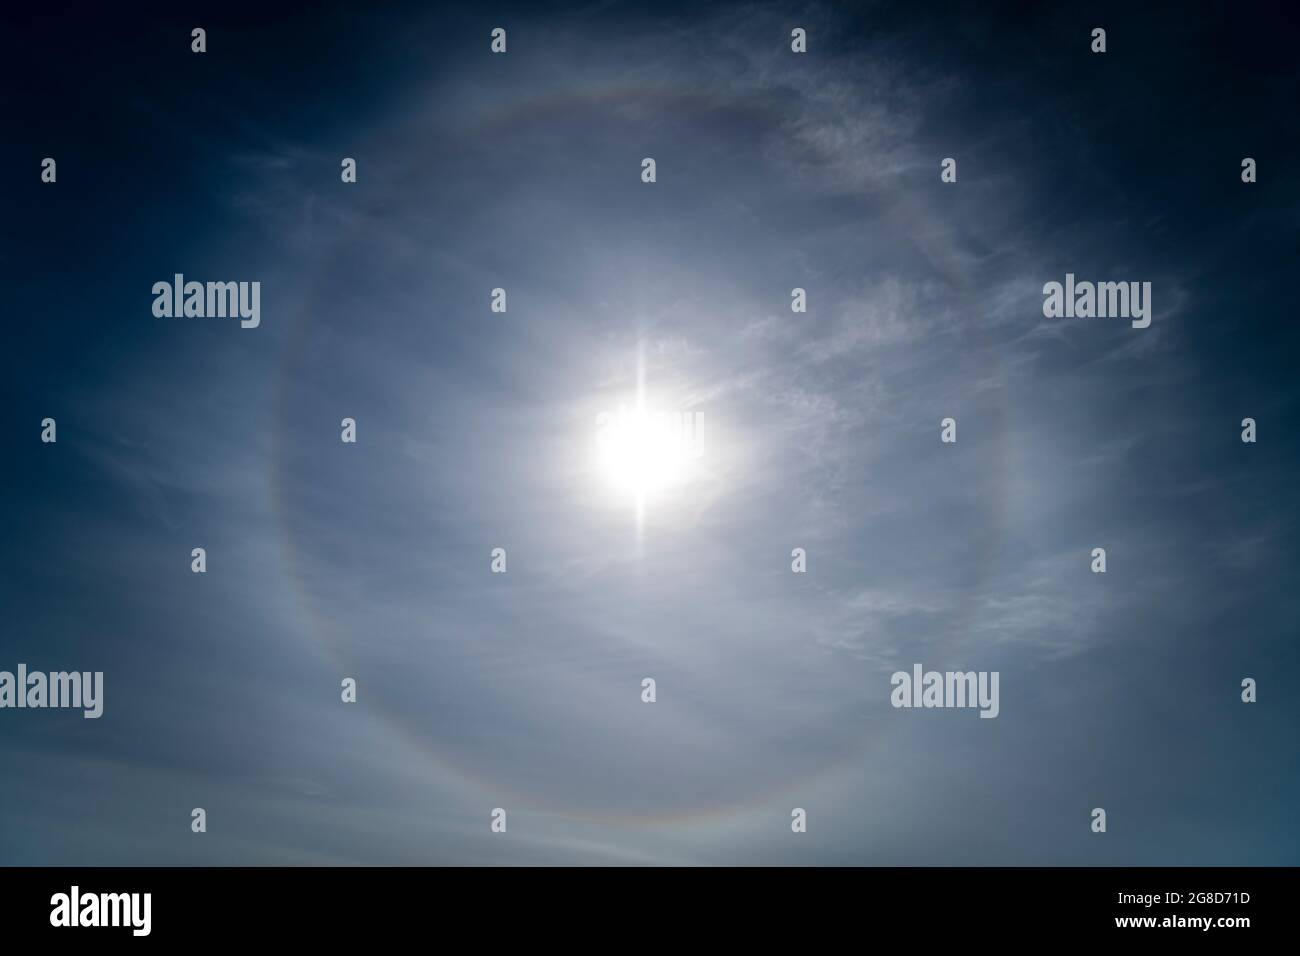 A 3 shot HDR image of a Sun Halo or 22 Degree Halo, an Atmospheric phenomena caused by ice crystals refracting light in Cirrus clouds, Scotland. Stock Photo